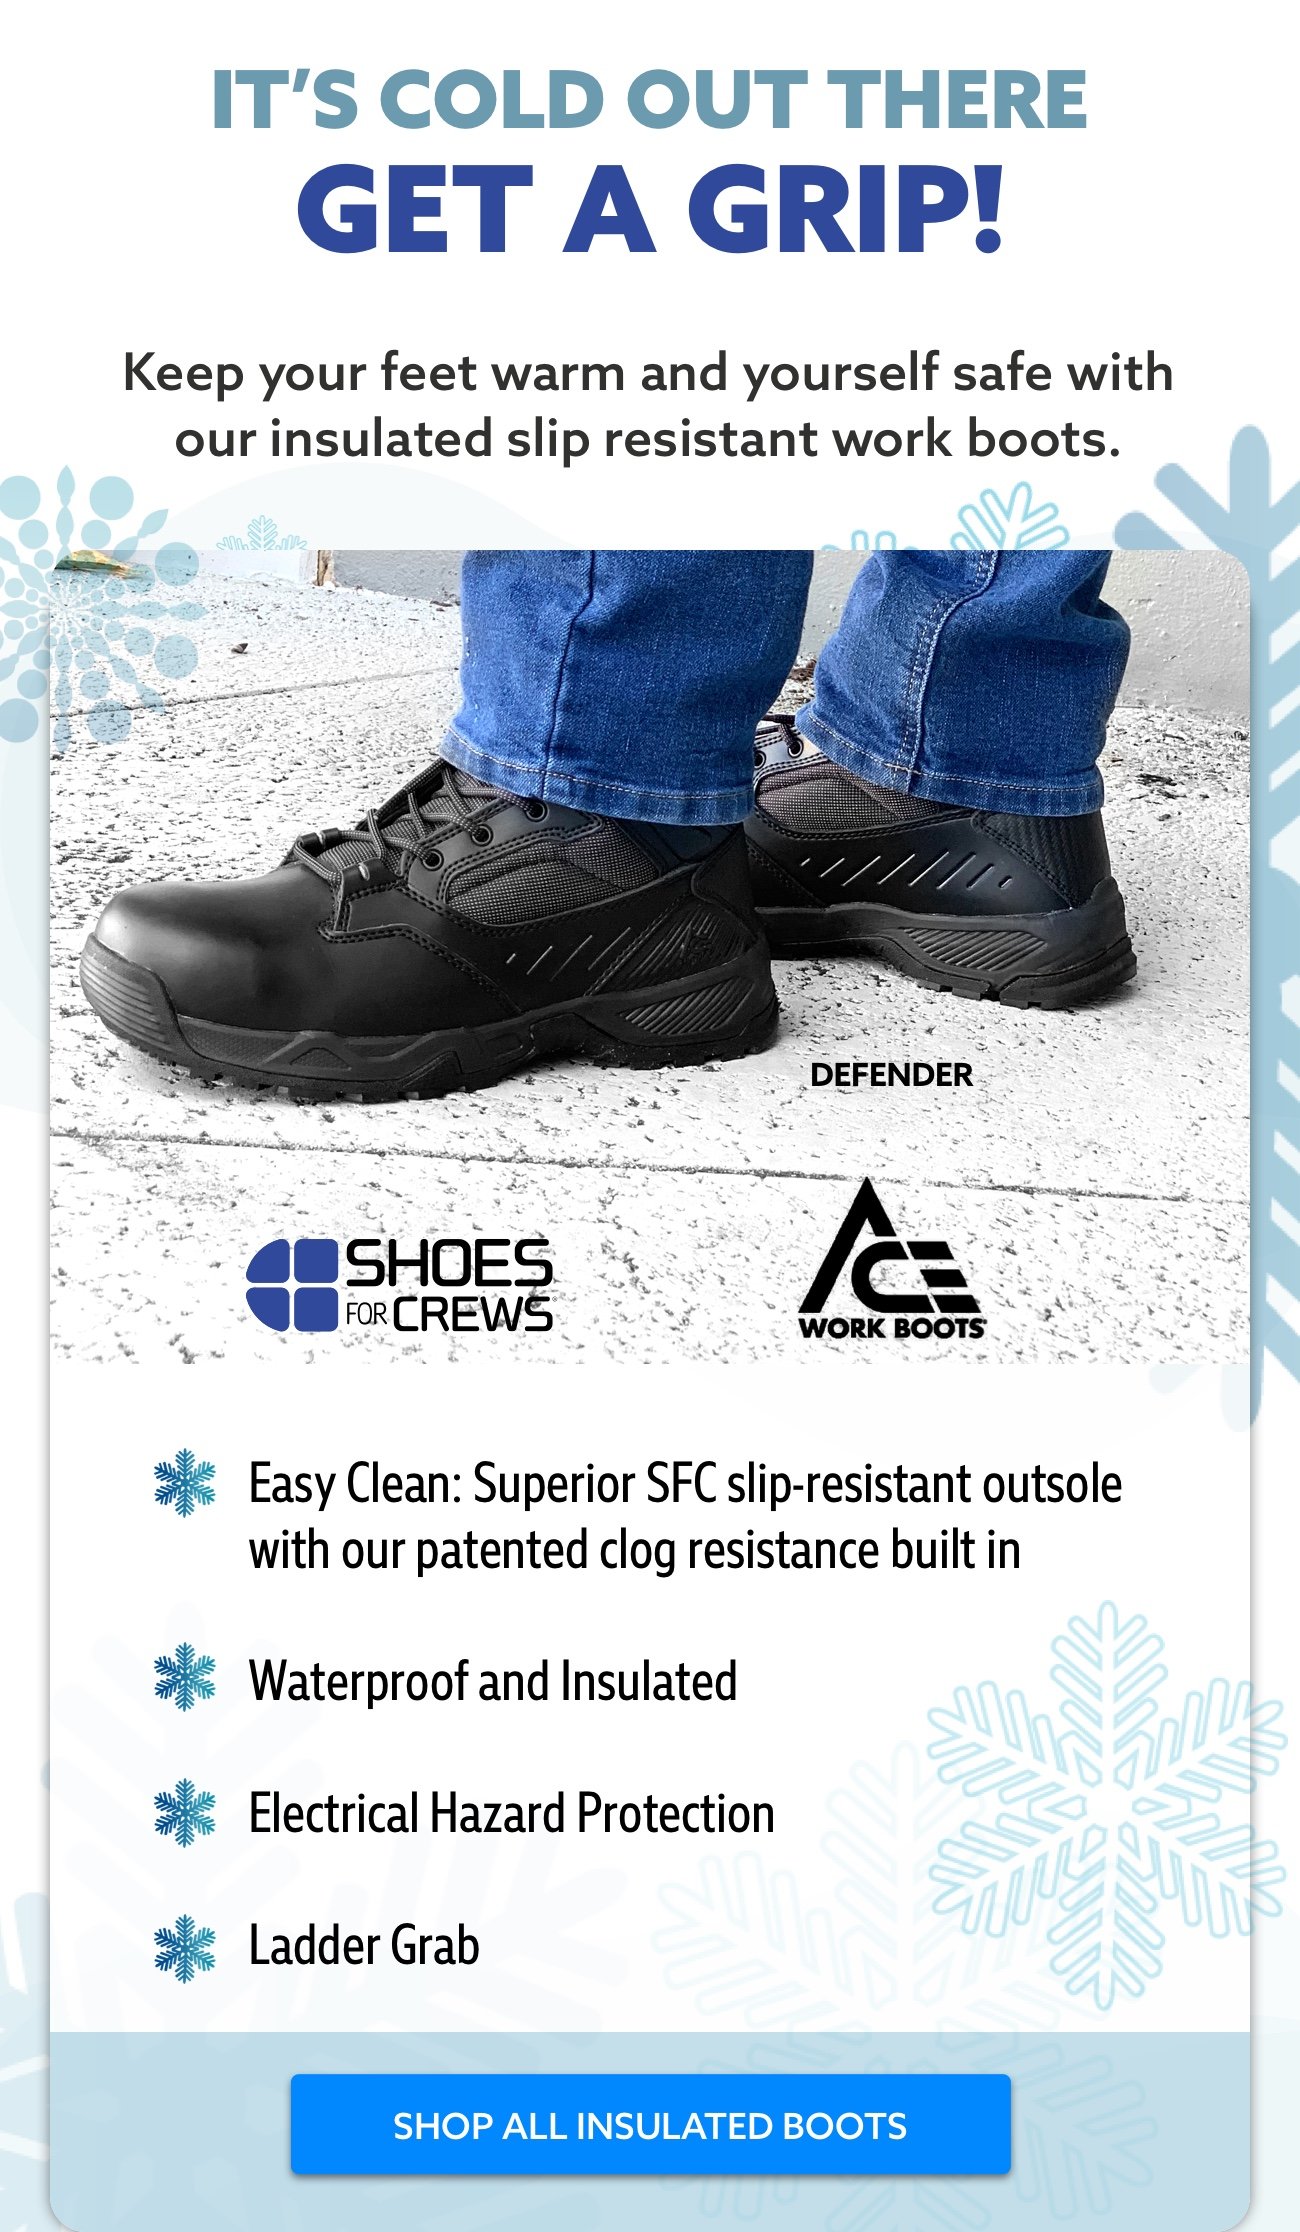 Shop all Insulated boots